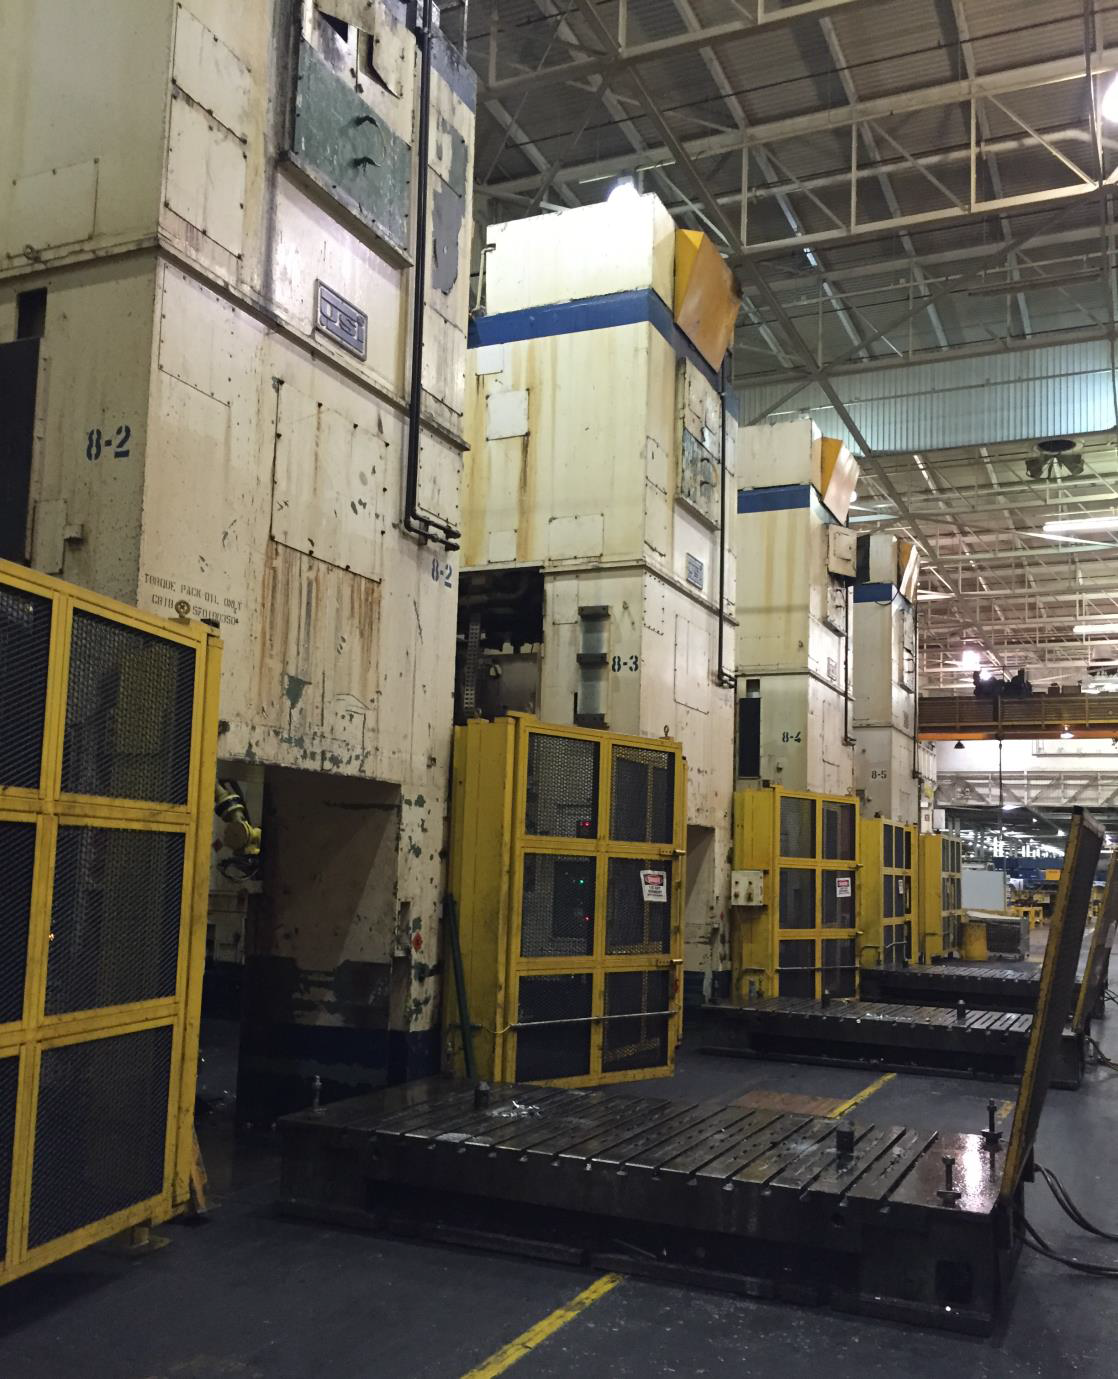 800 Ton Capacity USI/Clearing Press Line For Sale (4 Available)